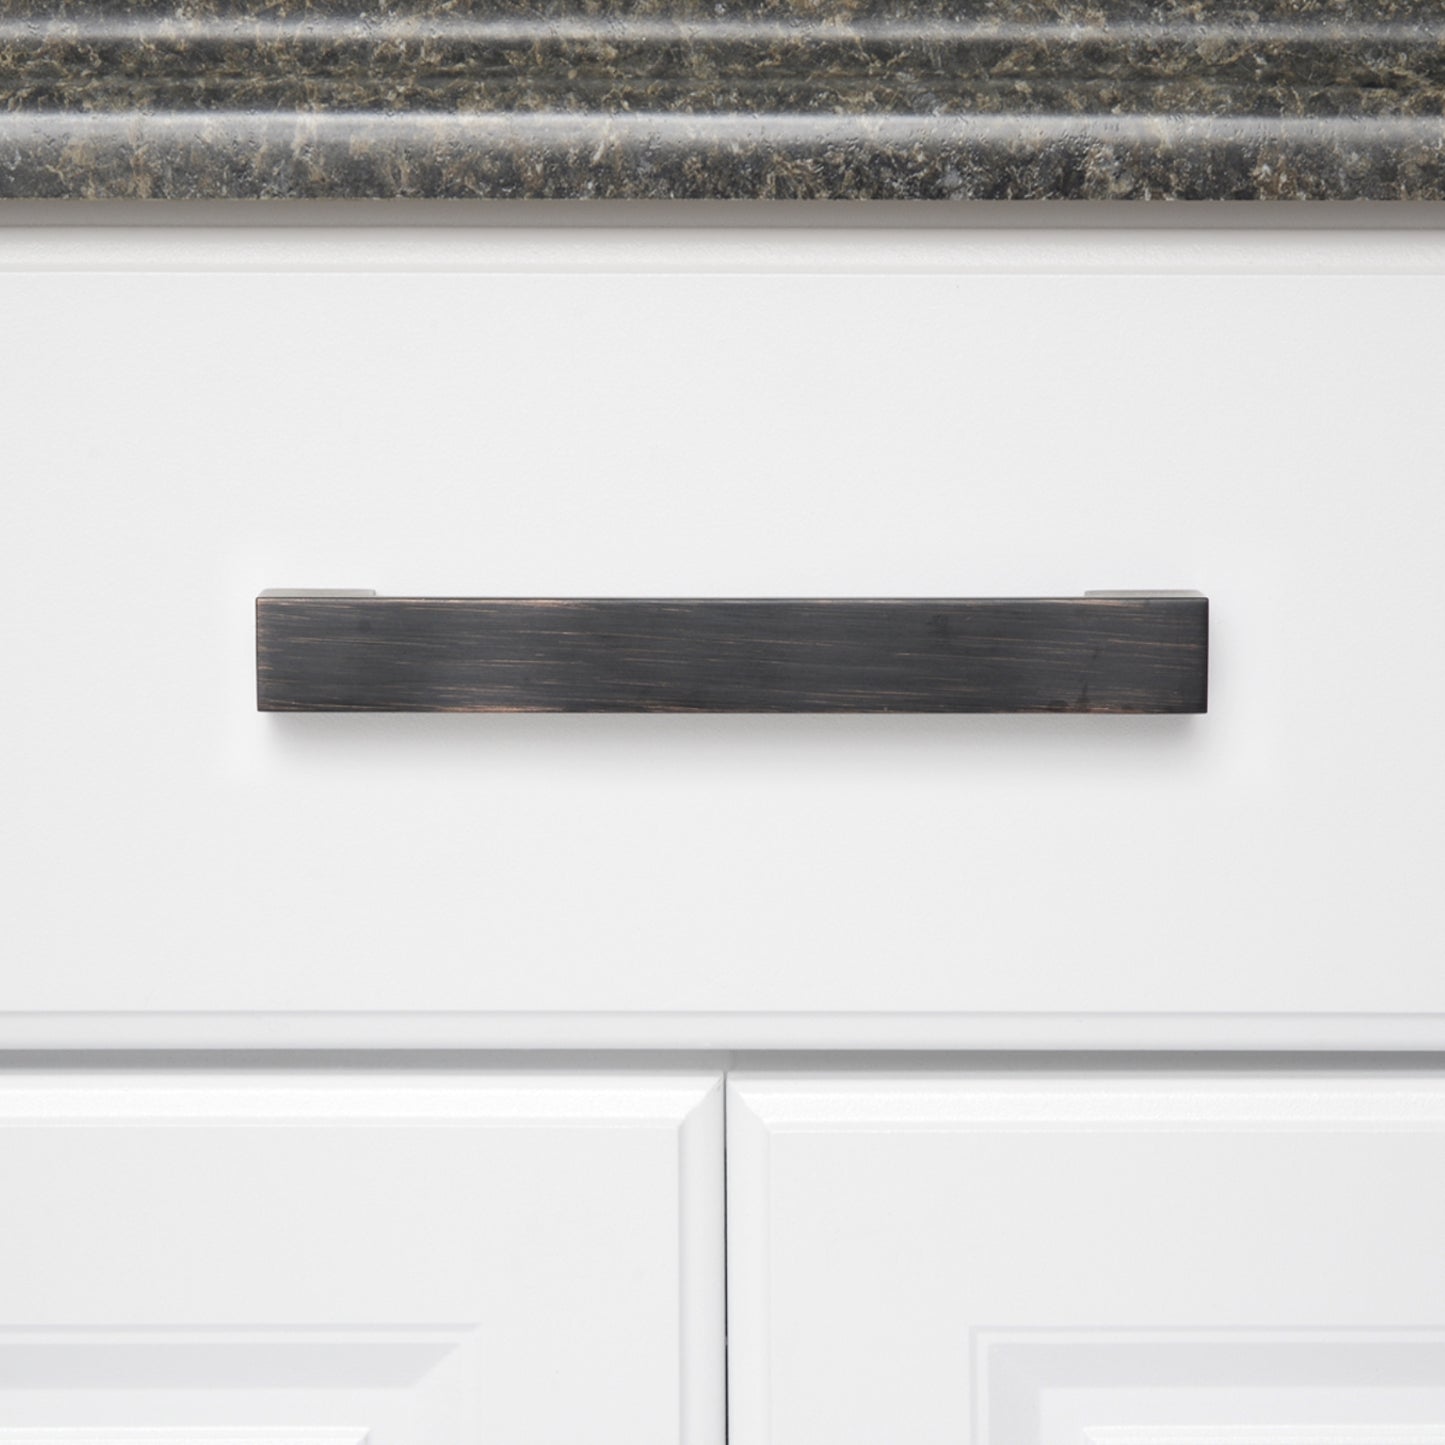 South Main Hardware Short Modern Cabinet Handle, 7.68" Length (6.4" Hole Center), Oil Rubbed Bronze, 10-Pack